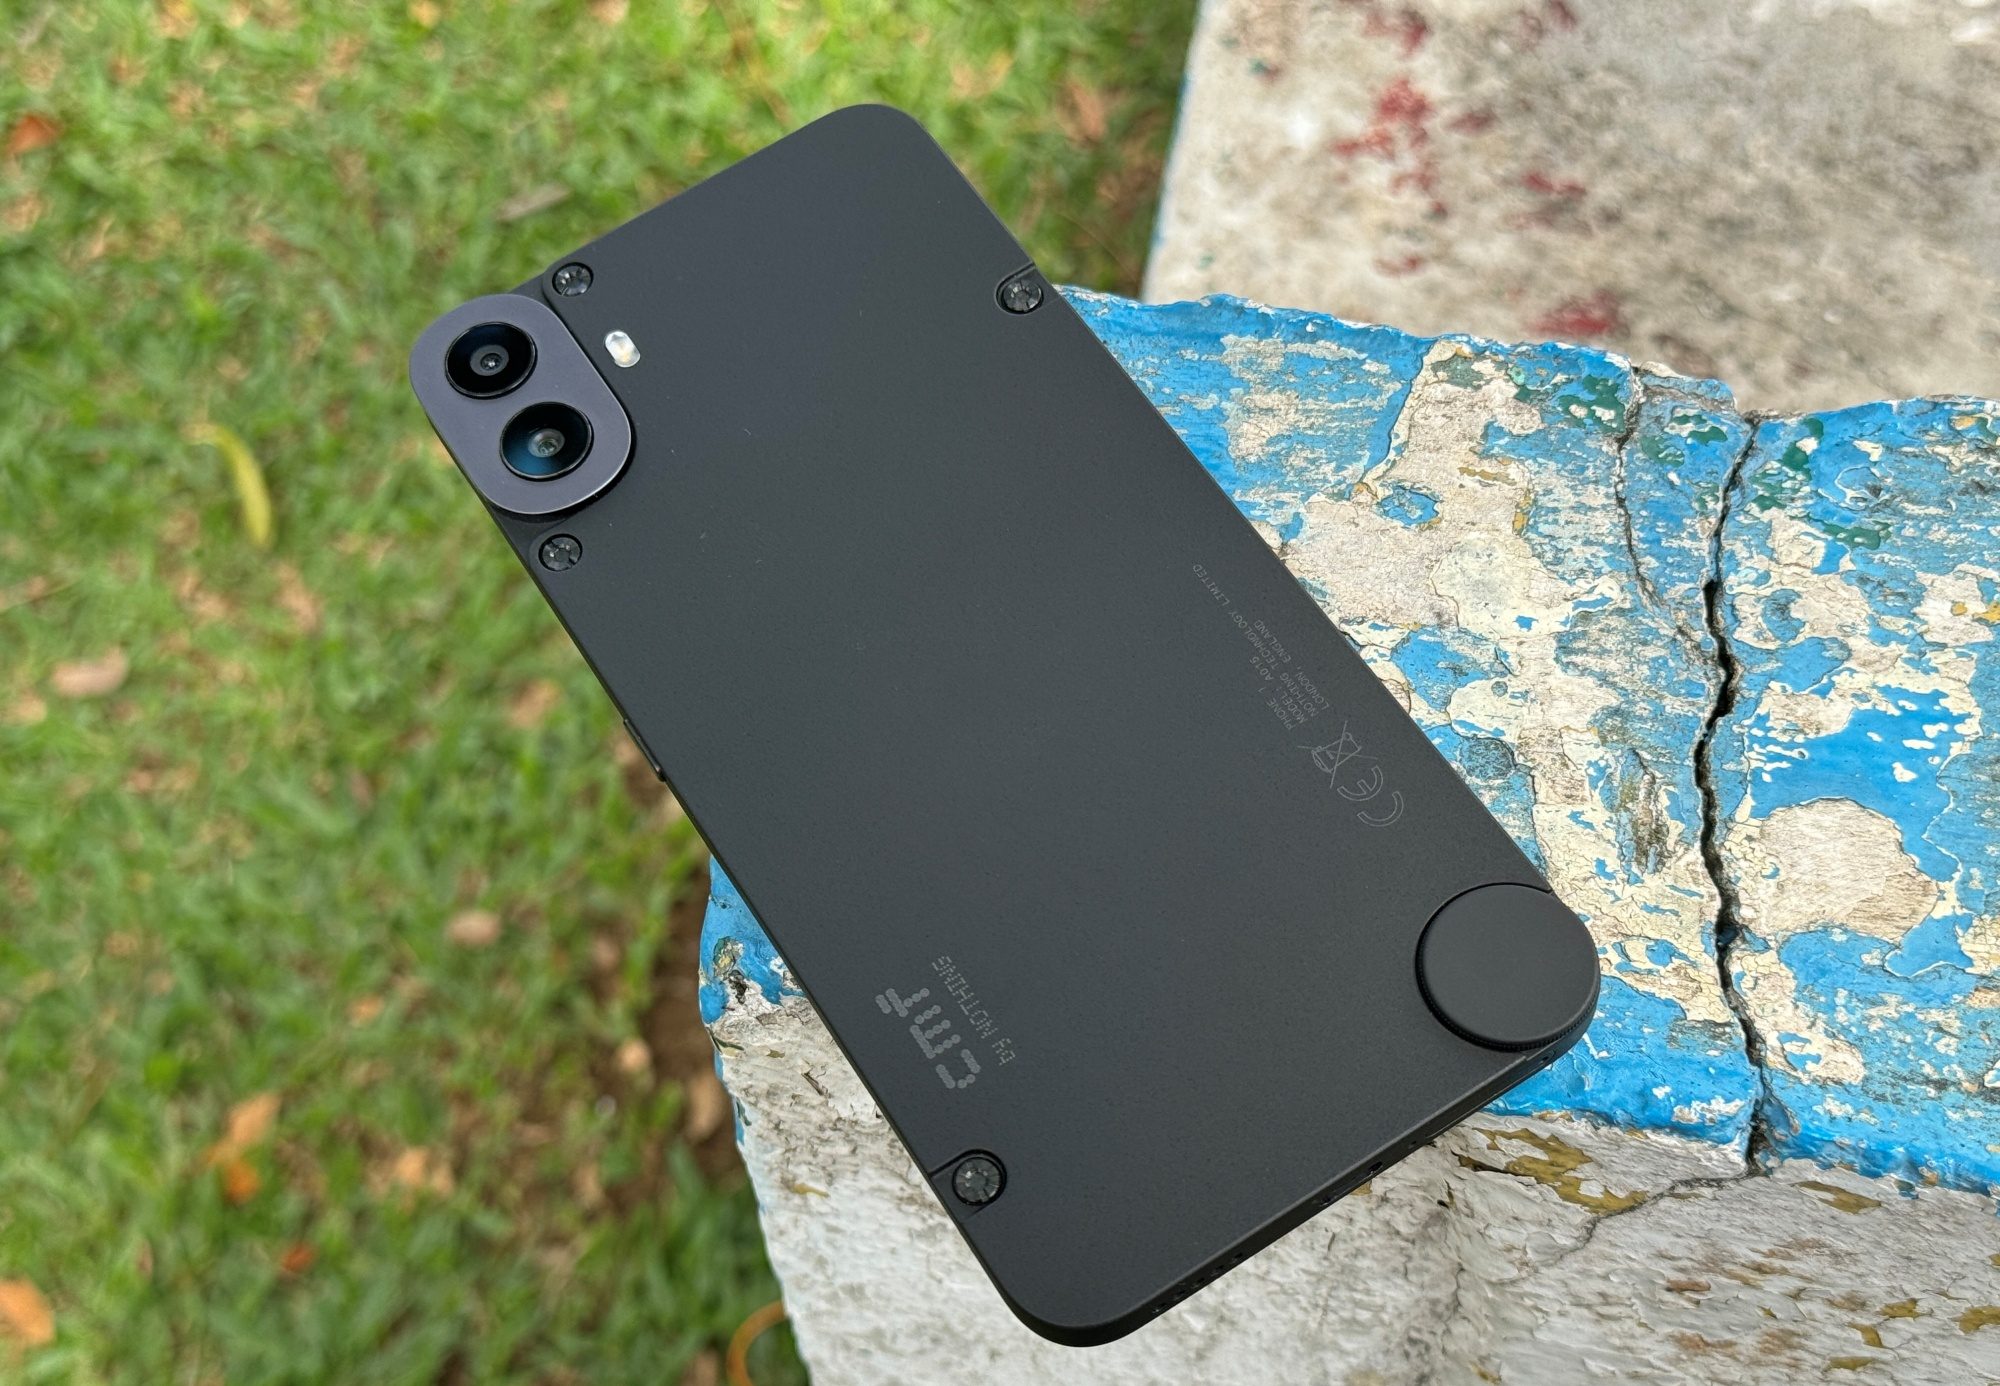 CMF Phone 1 Hands On: A Mid-Ranger With A Design To Love - Refleks